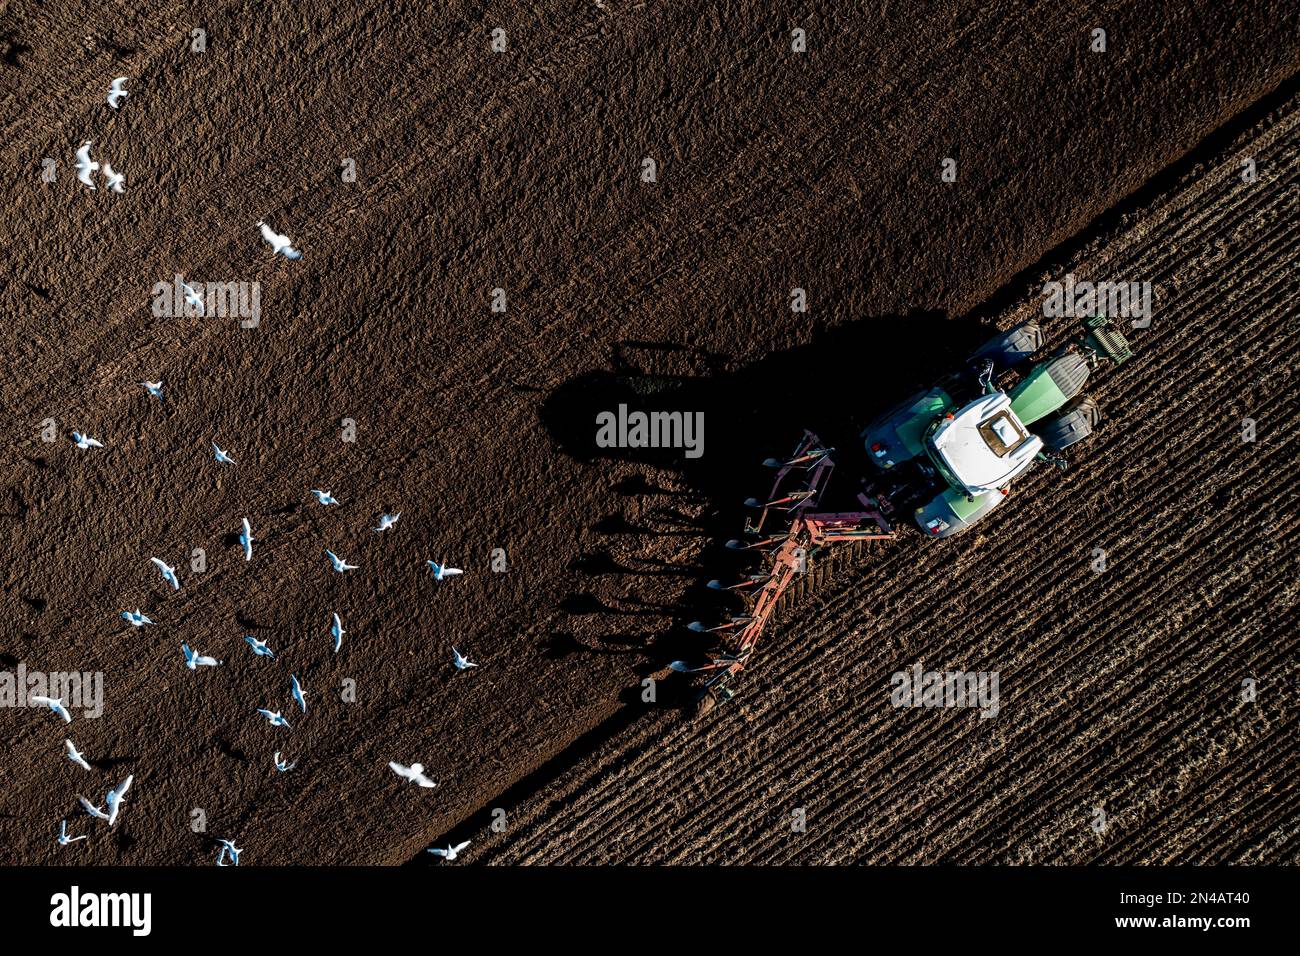 An aerial view of a tractor ploughing a fertile agricultural field with a flock of seagulls and birds scavenging for food in the soil Stock Photo